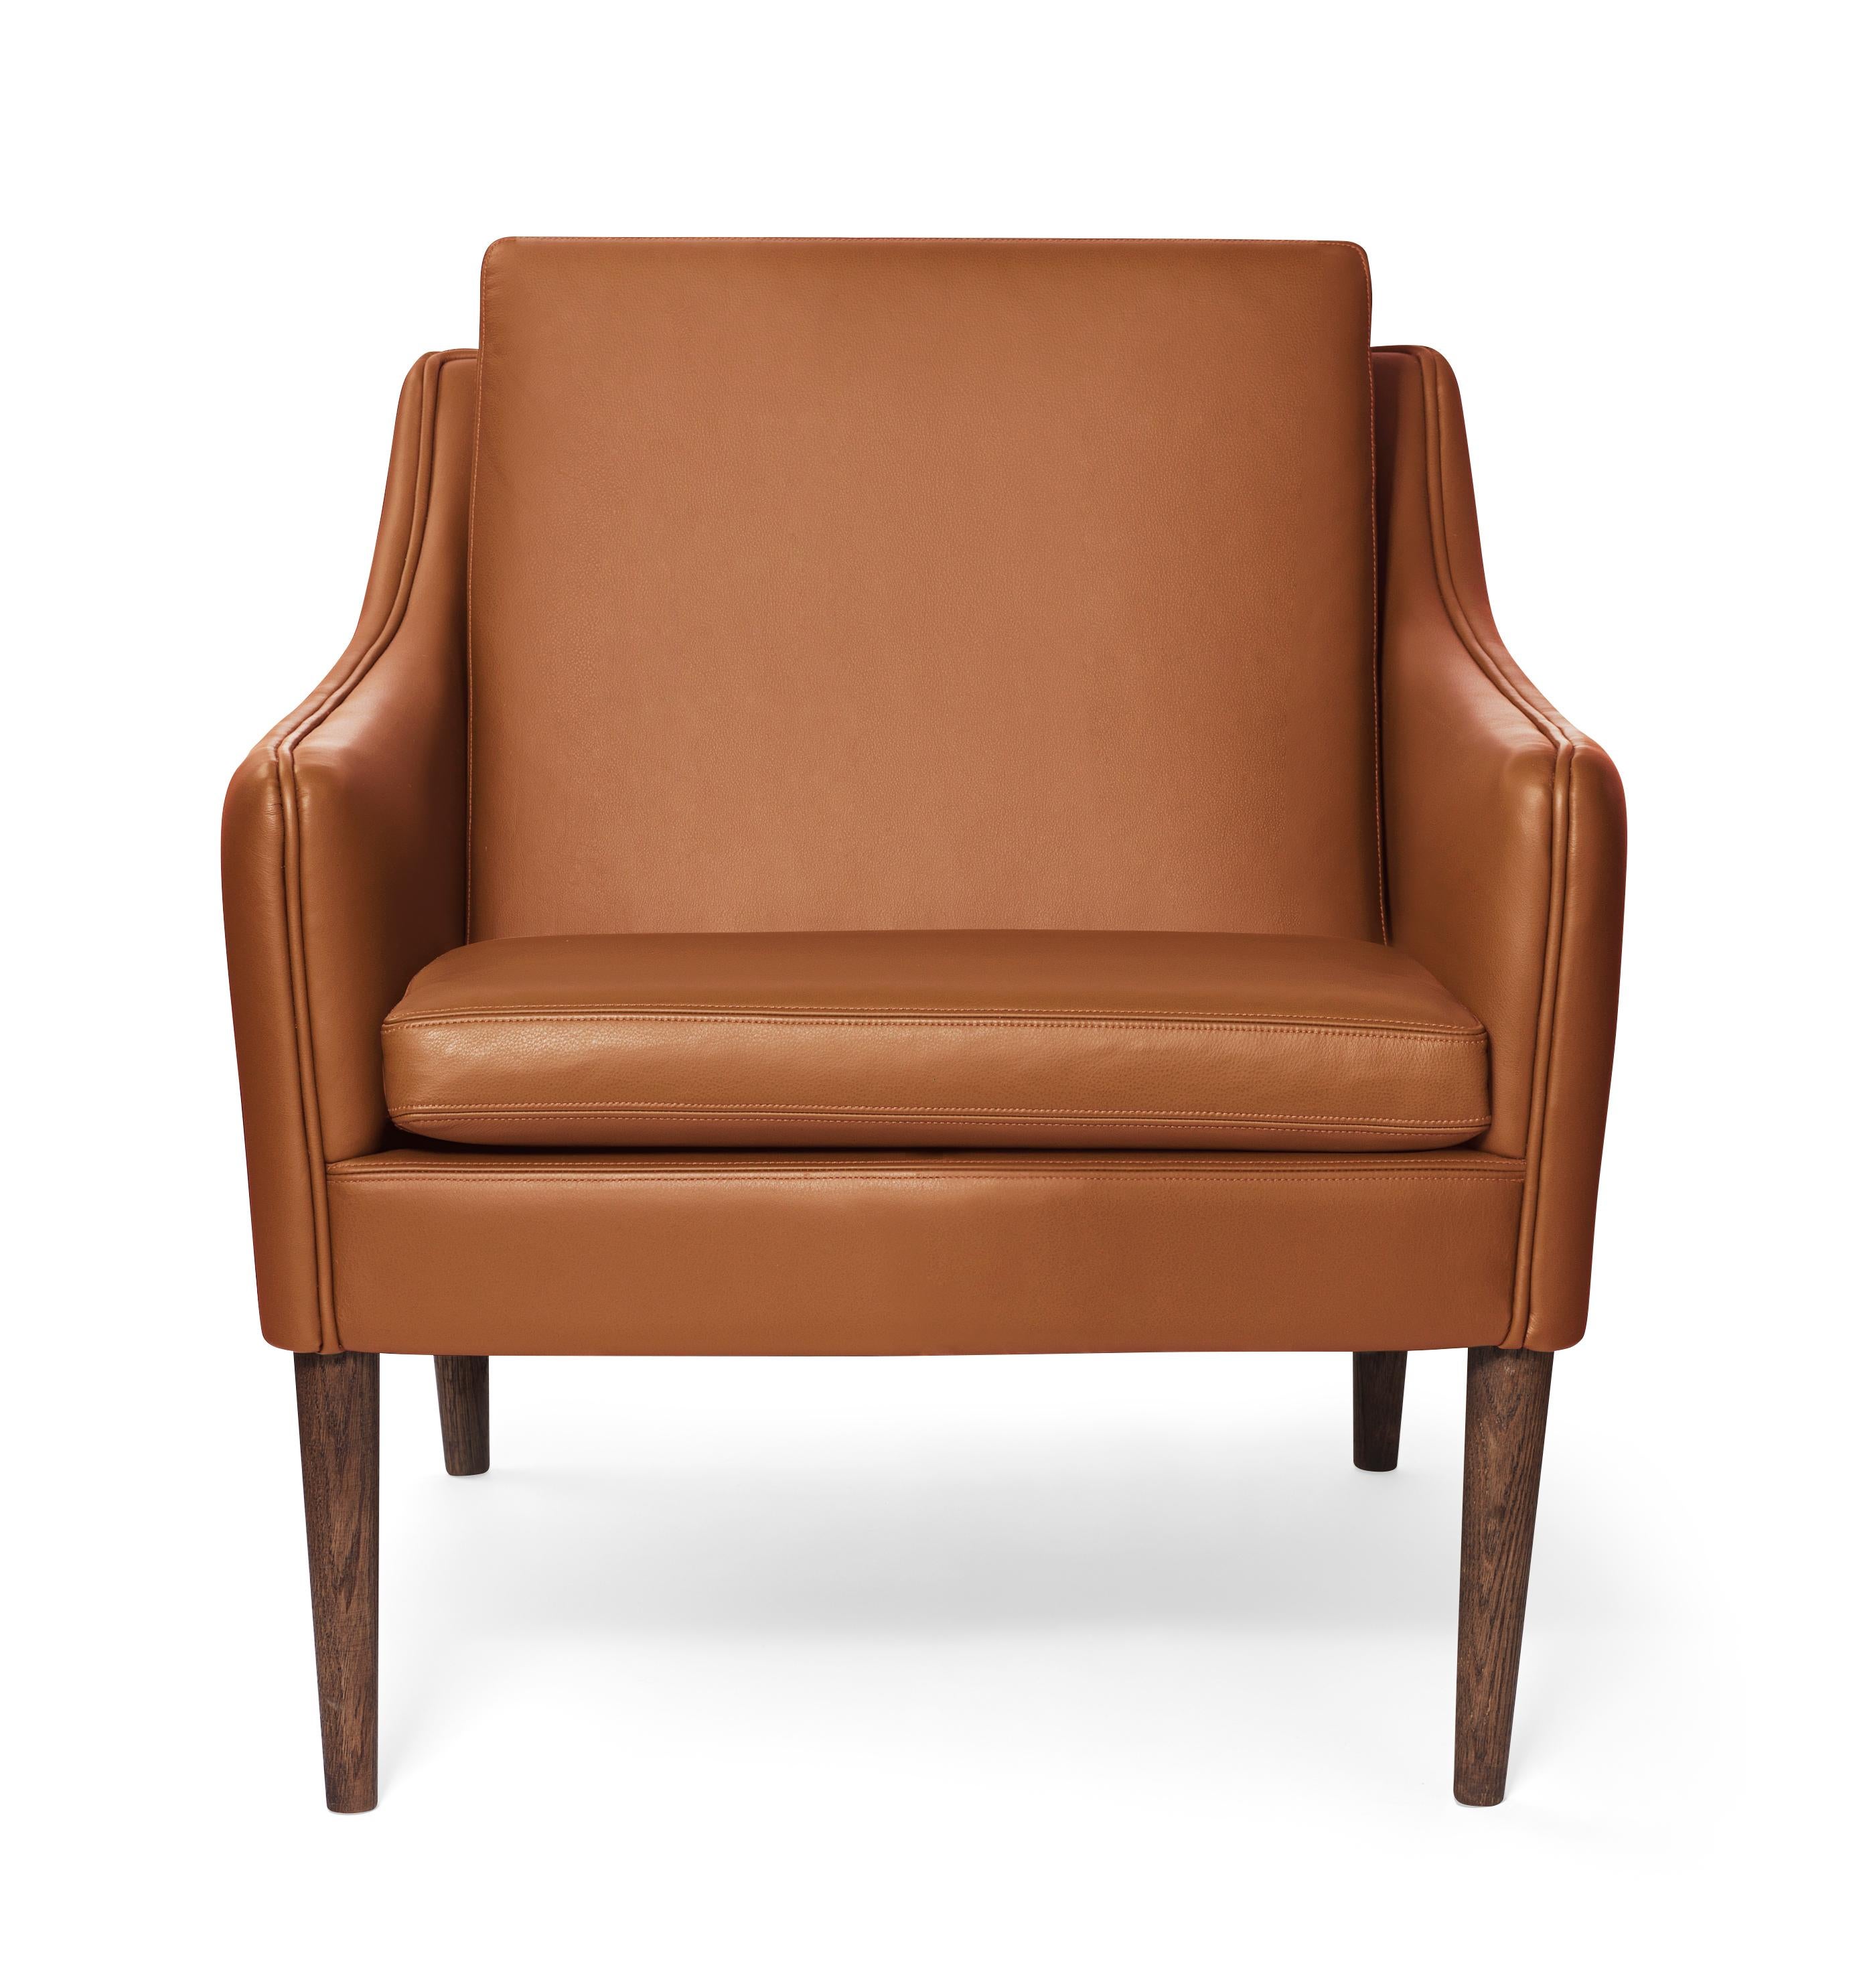 For Sale: Brown (Challenger Cognac) Mr. Olsen Lounge Chair with Smoked Legs, by Hans Olsen from Warm Nordic